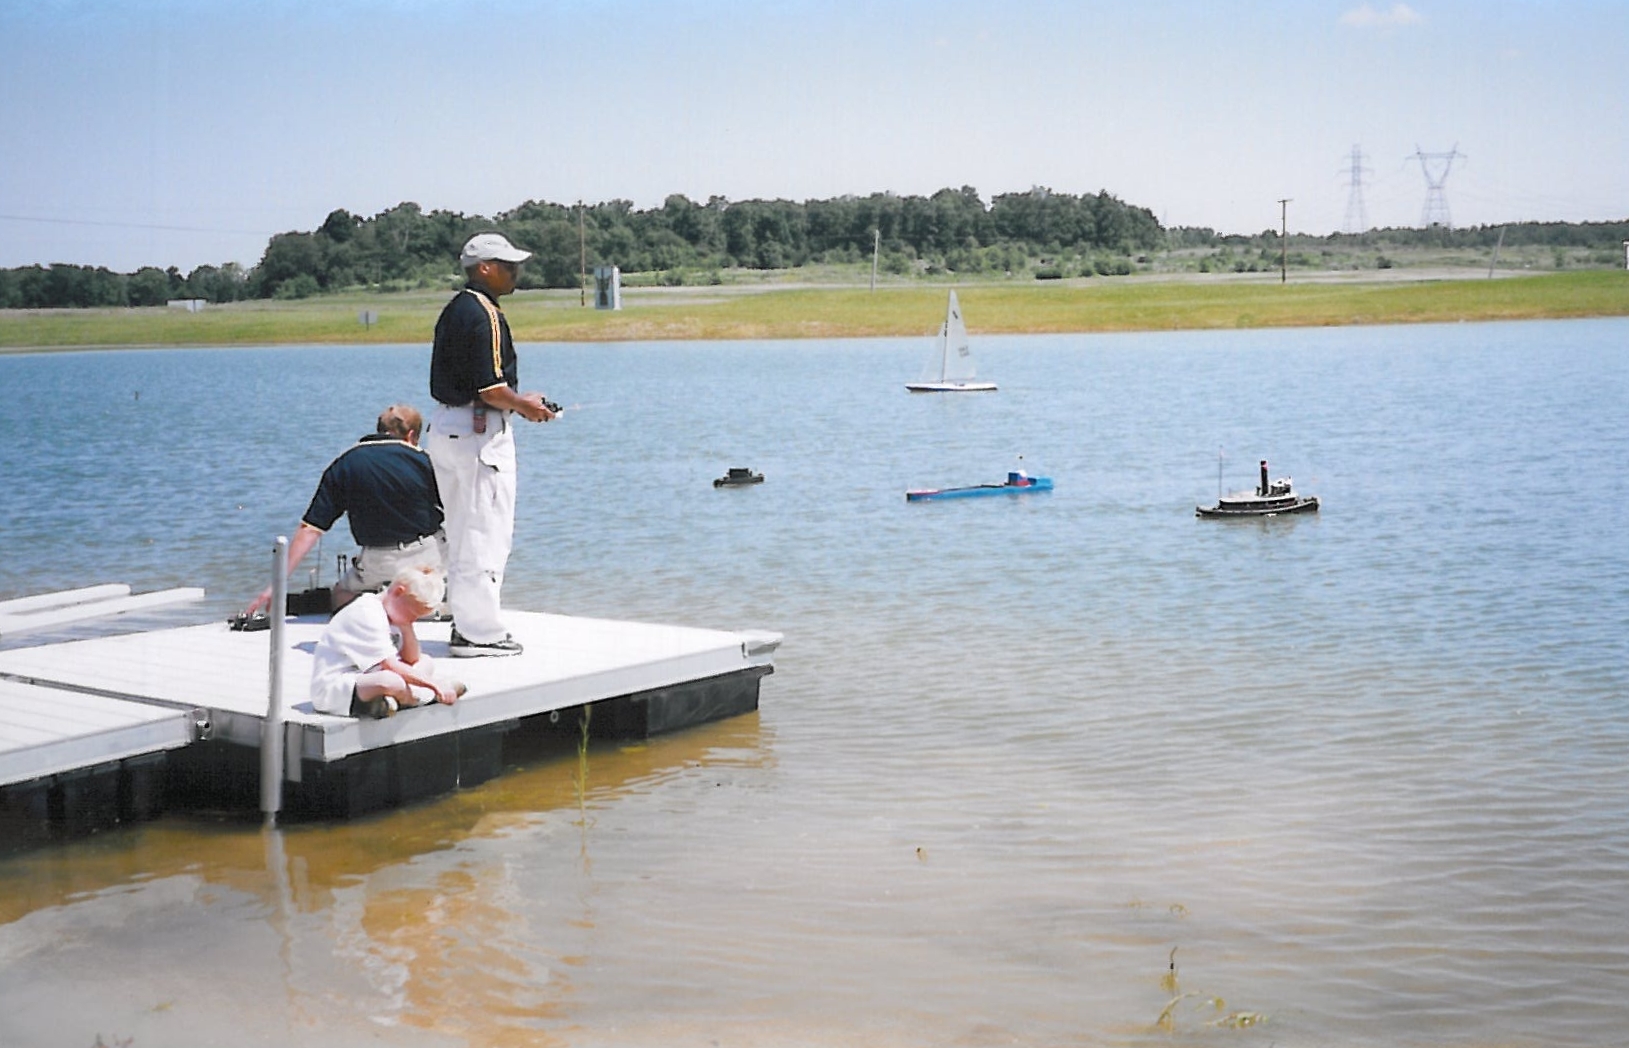 Radio Control boating, Grand Event, July 9, 2001. (Source: National Model Aviation Museum Archives, AMA Collection #0001, Photo Credit: AMA staff.) 